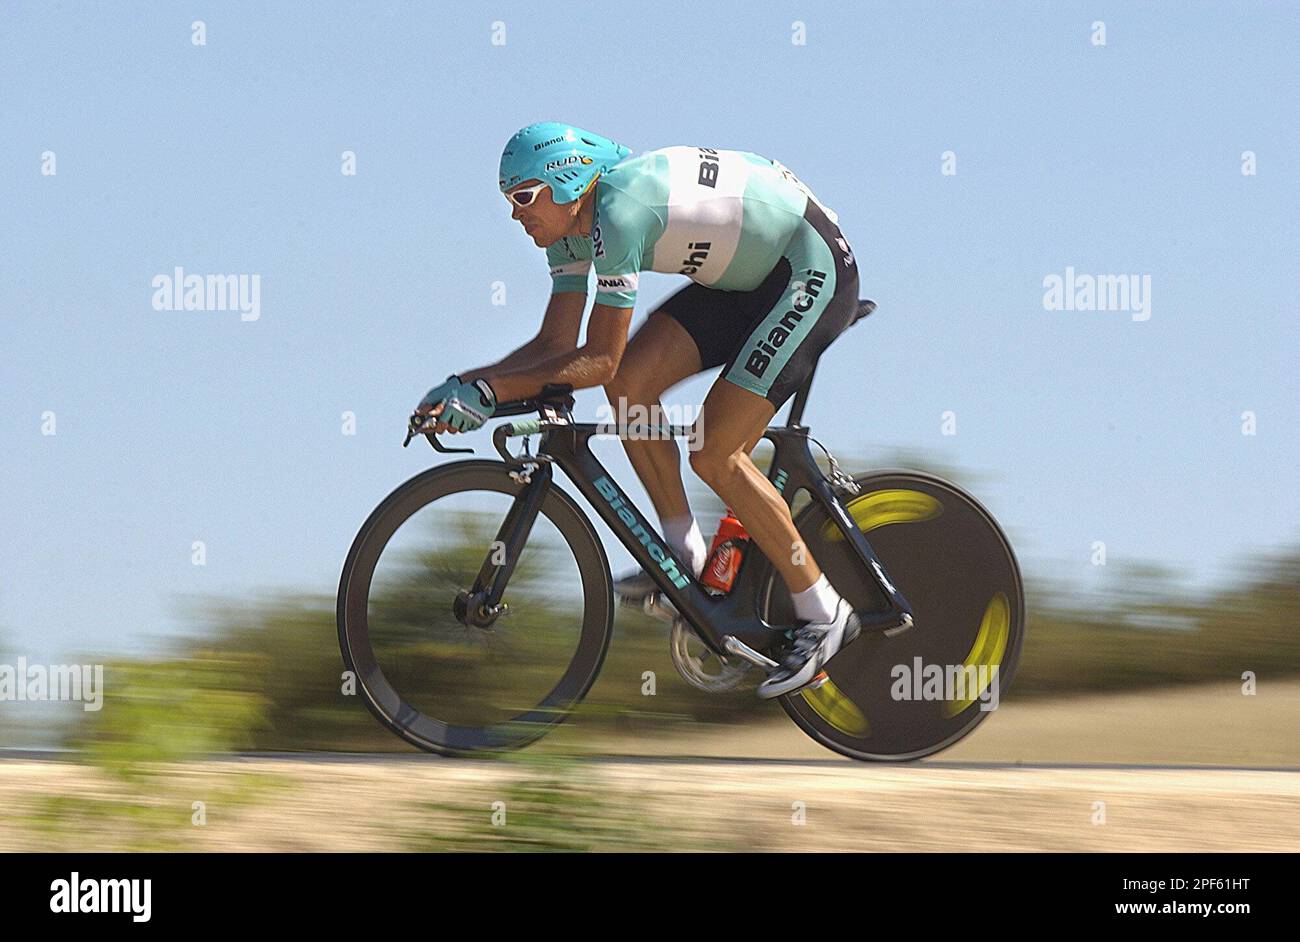 Jan Ullrich of Germany pedals during the 12th stage of the Tour de France  cycling race, a 47-kilometer (29-mile) individual time trial between  Gaillac and Cap' Decouverte, southwestern France, Friday, July 18,